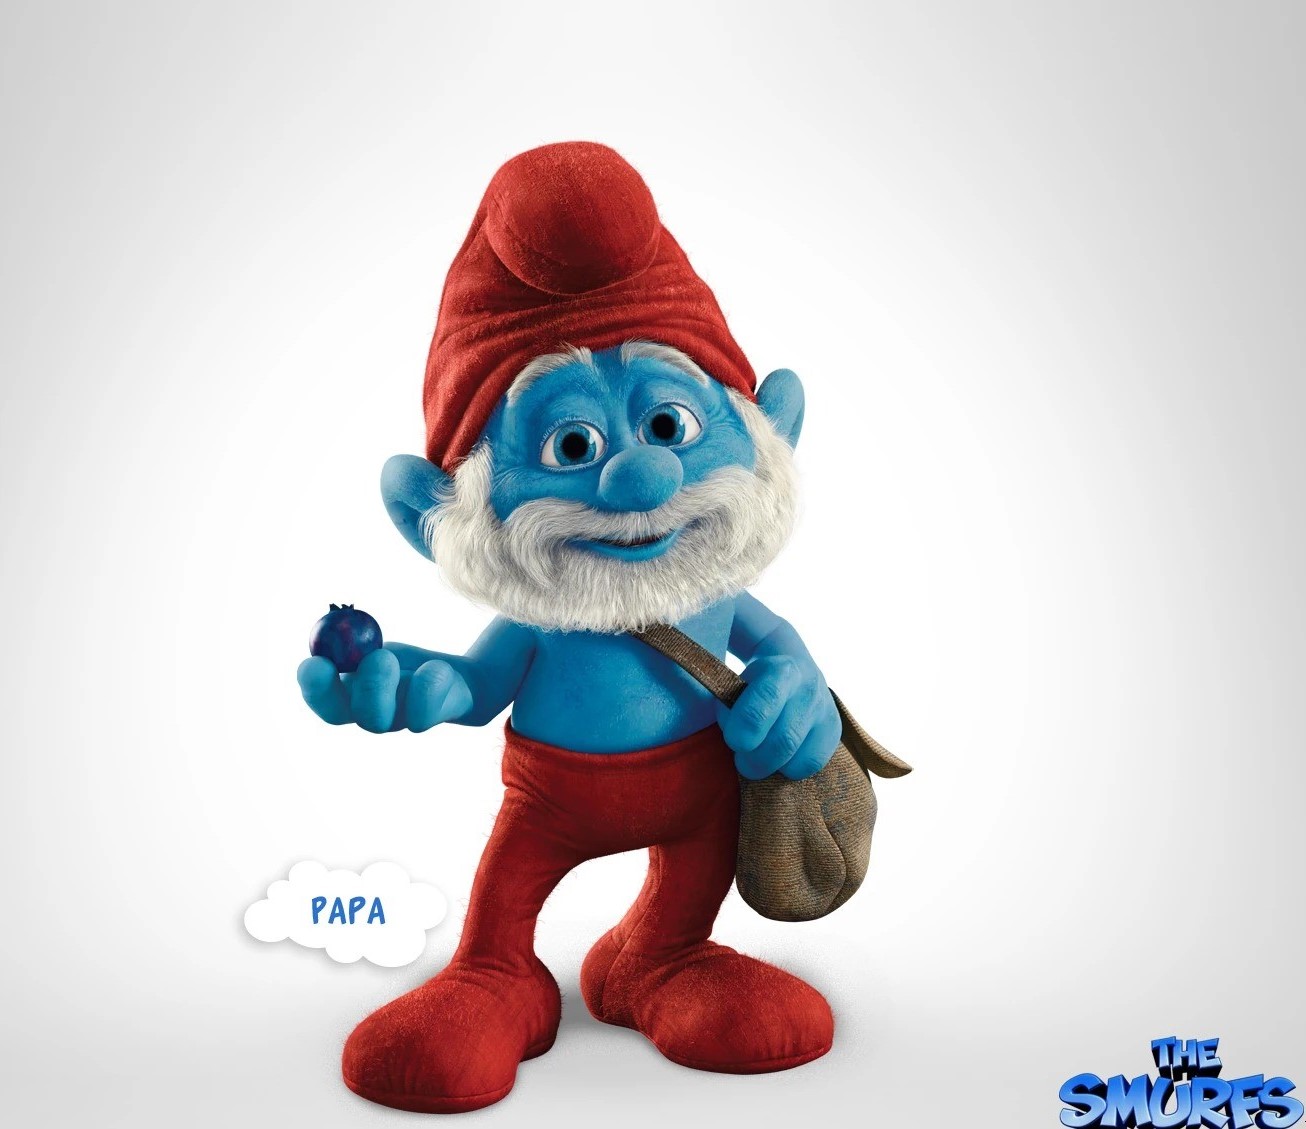 20-facts-about-papa-smurf-the-smurfs